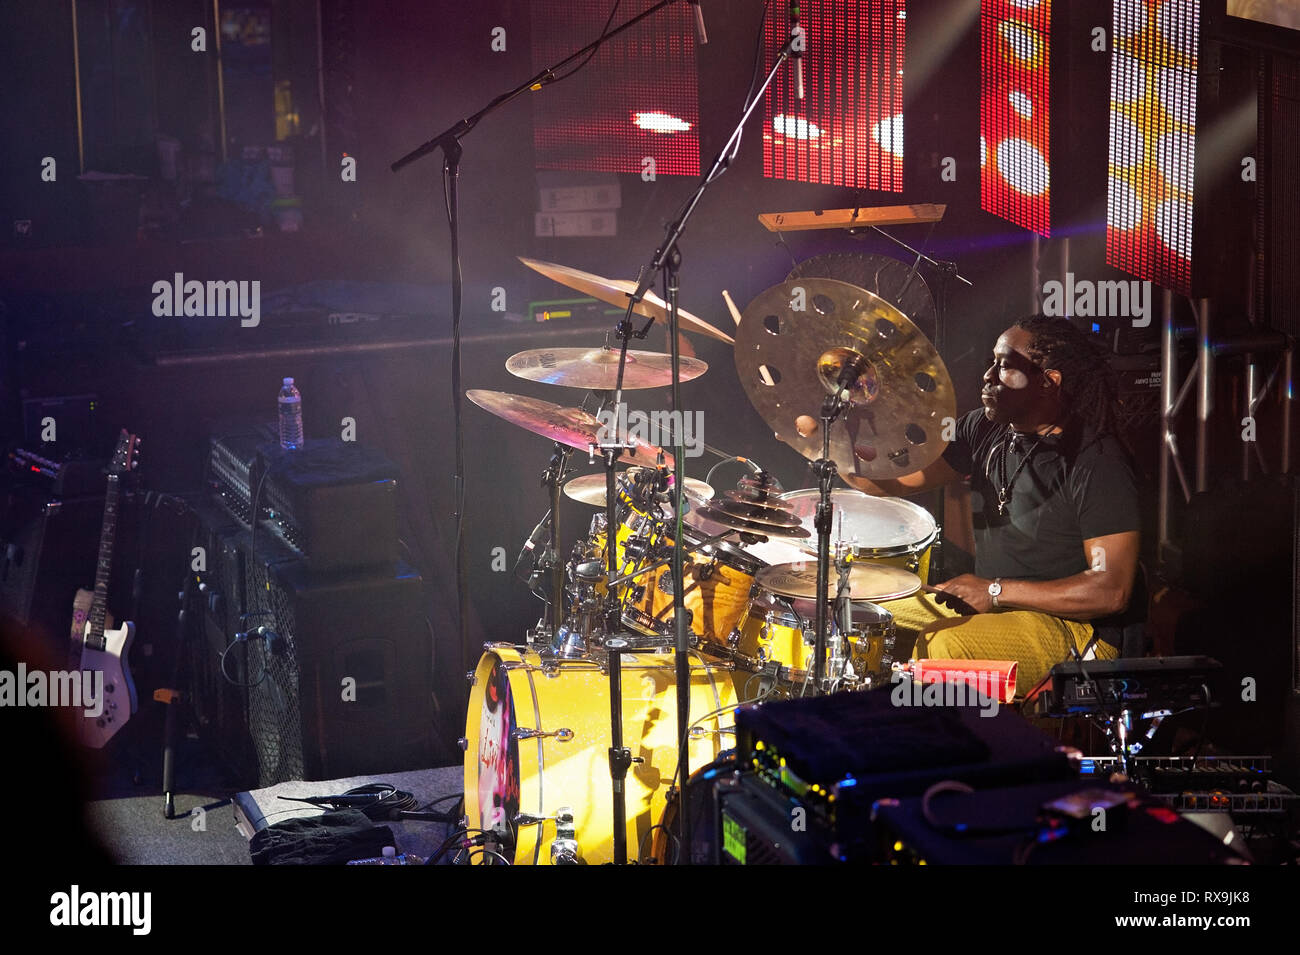 Will Calhoun, drummer for the band, 'Living Colour' drumming for a show held at the Culture Room in Ft. Lauderdale, Florida on October 27, 2017. Stock Photo